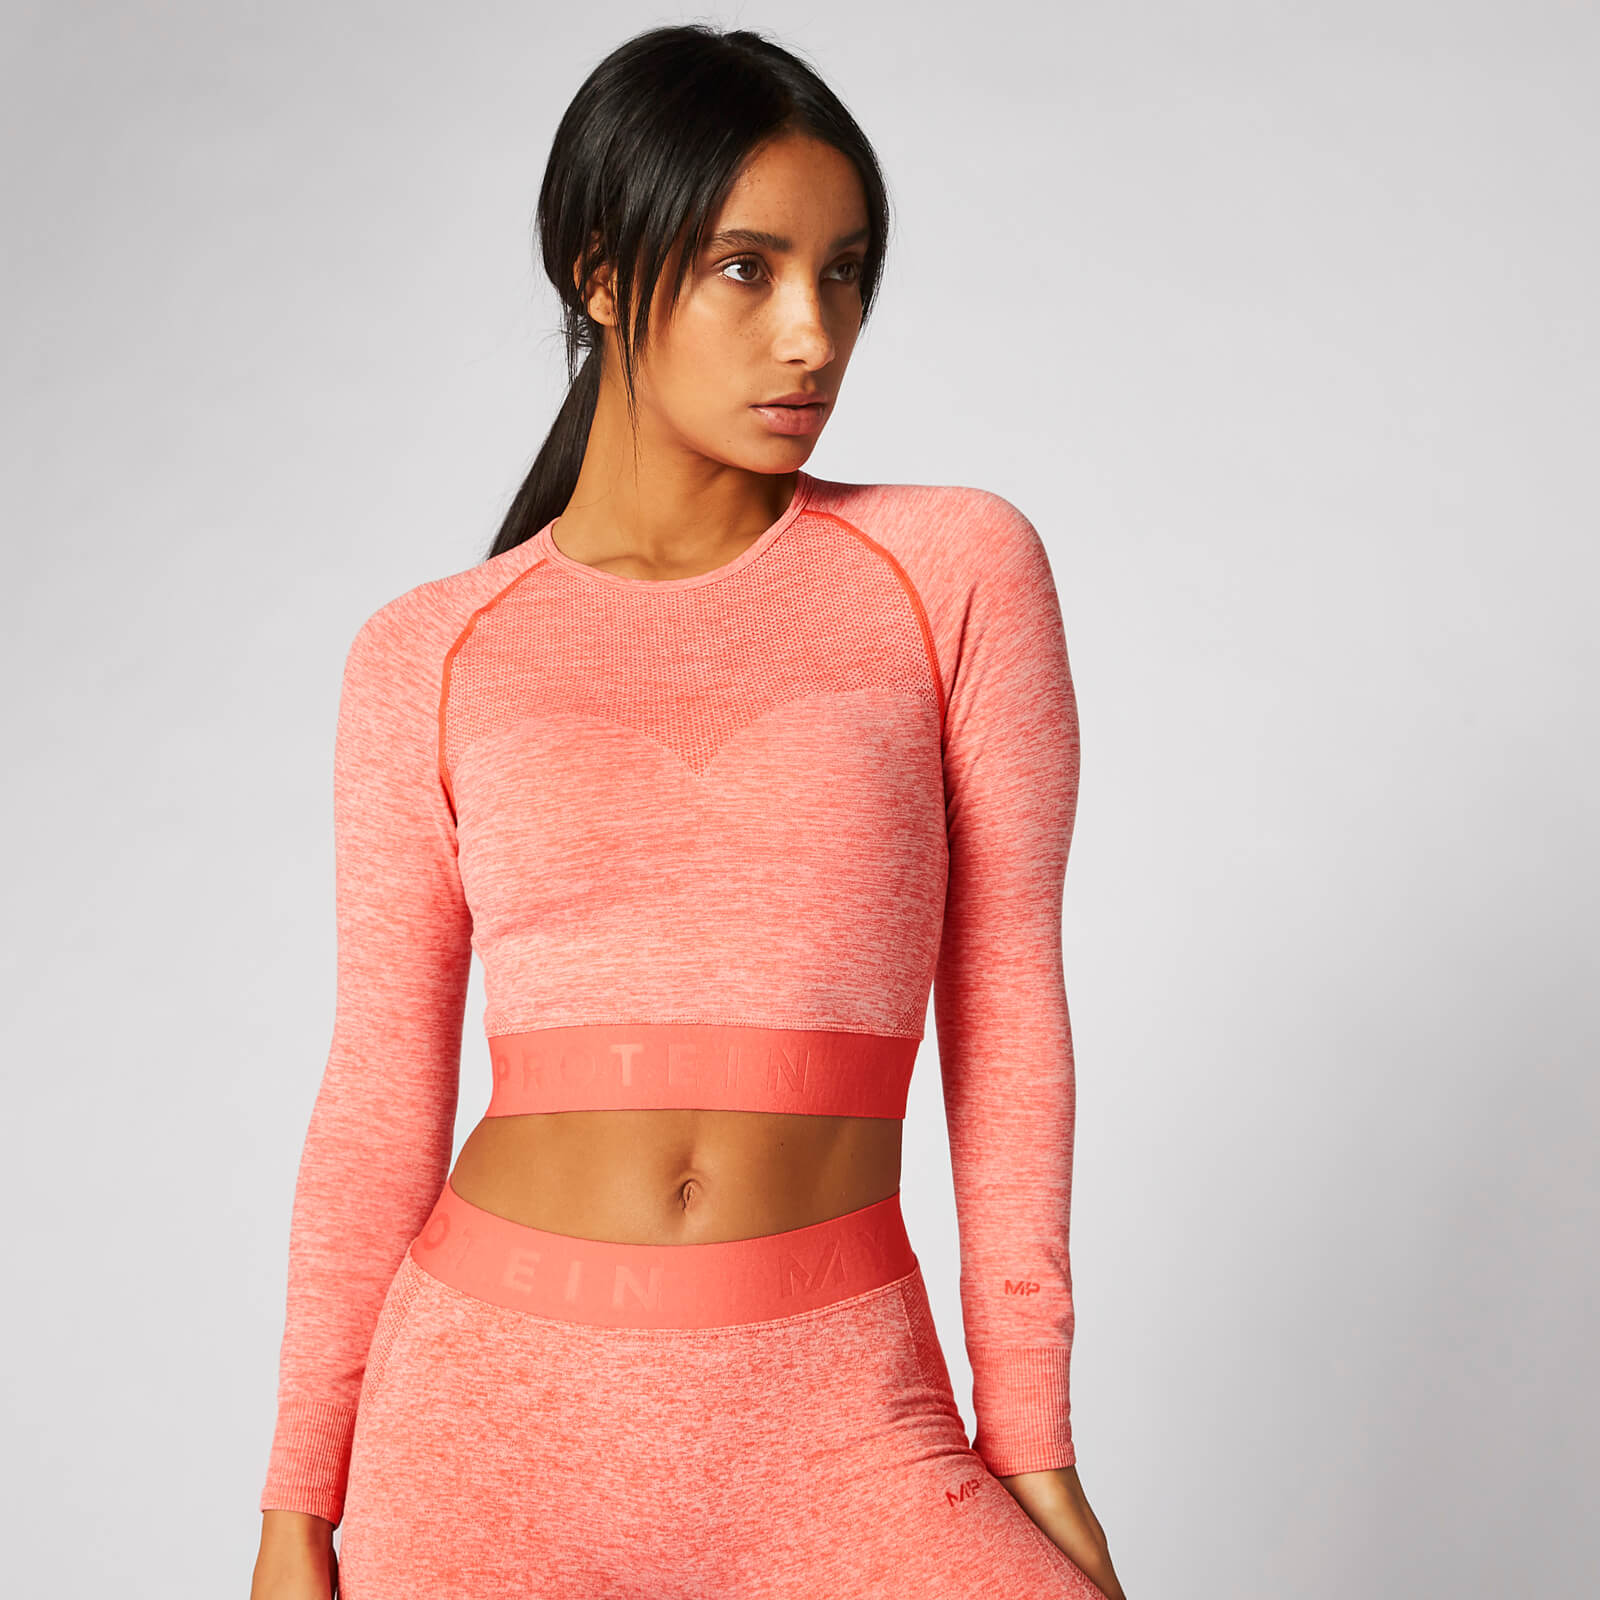 MP Inspire Seamless Crop Top - Hot Coral